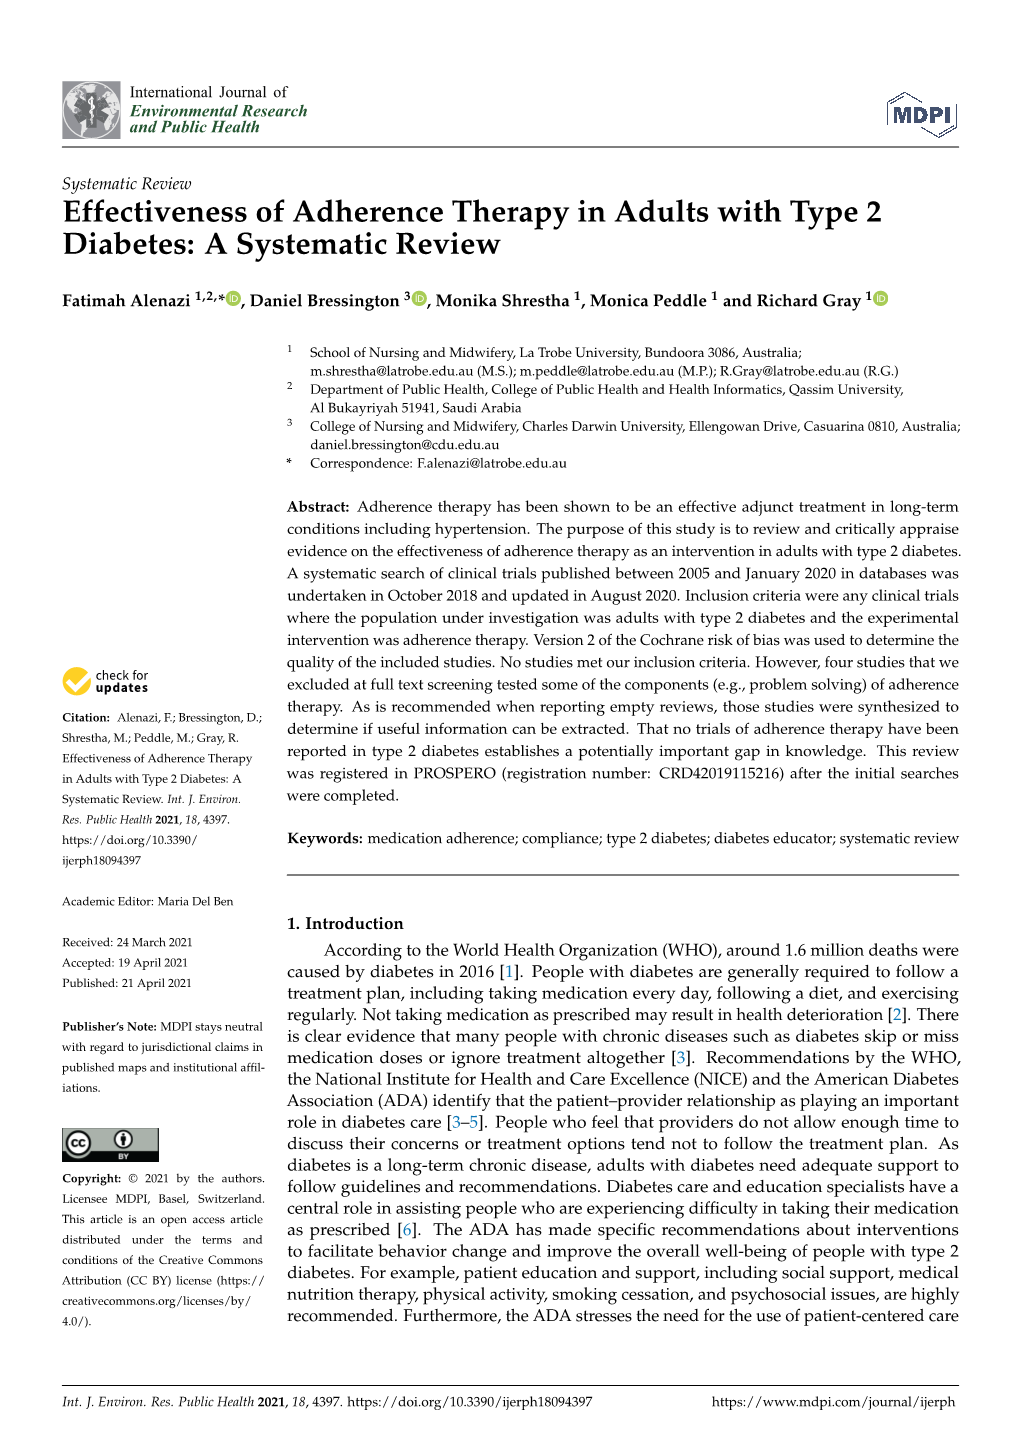 Effectiveness of Adherence Therapy in Adults with Type 2 Diabetes: a Systematic Review